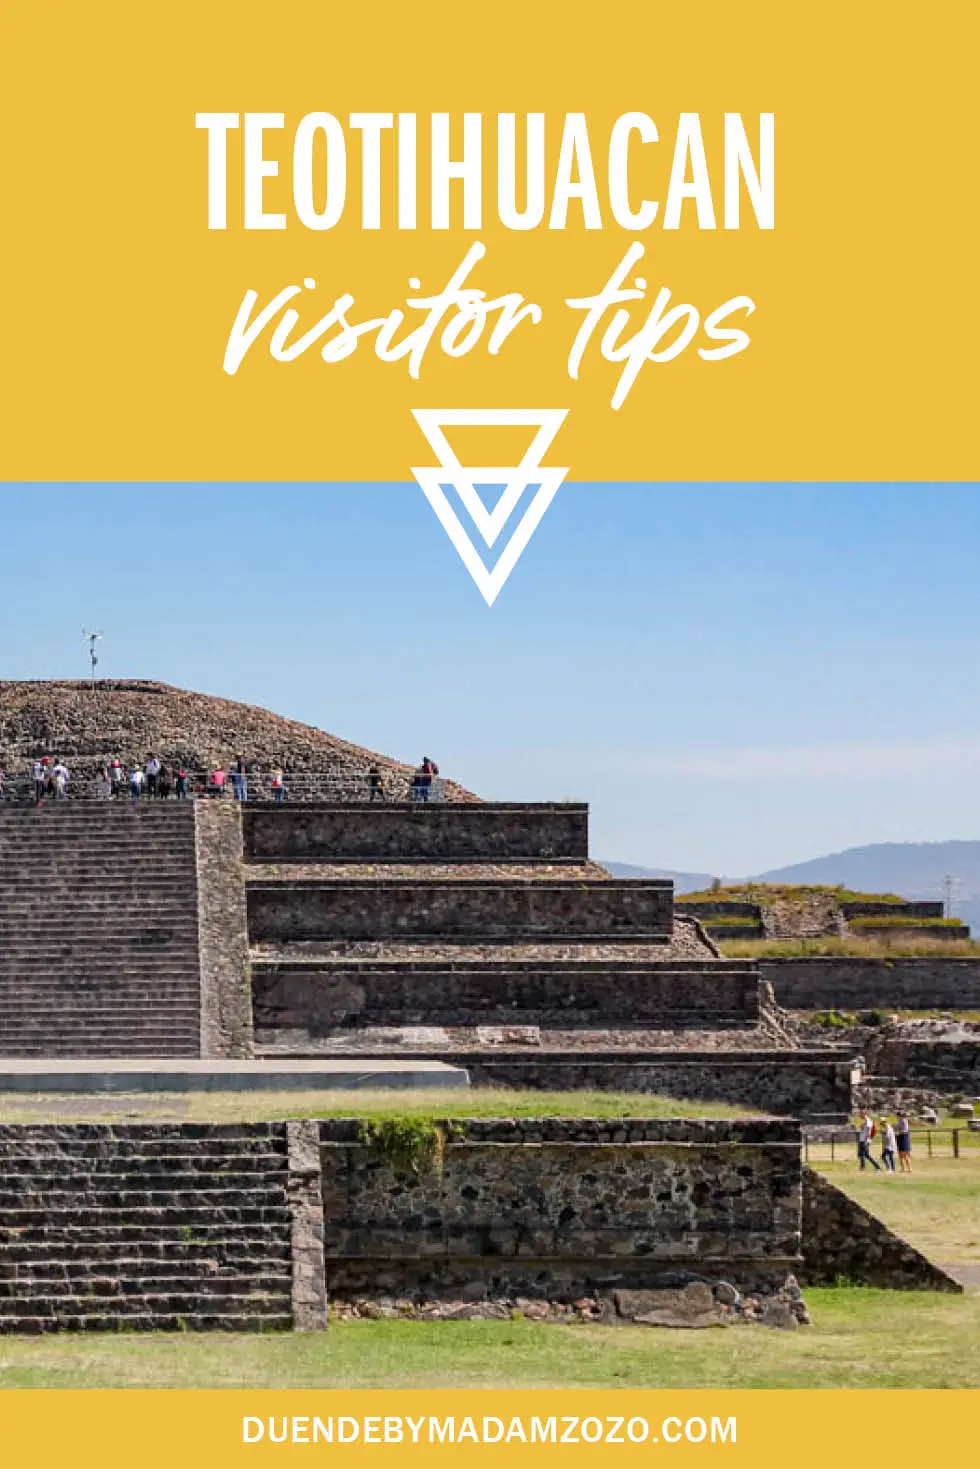 Image of pyramid at archaeological site with title "Teotihuacan Visitor Tips"